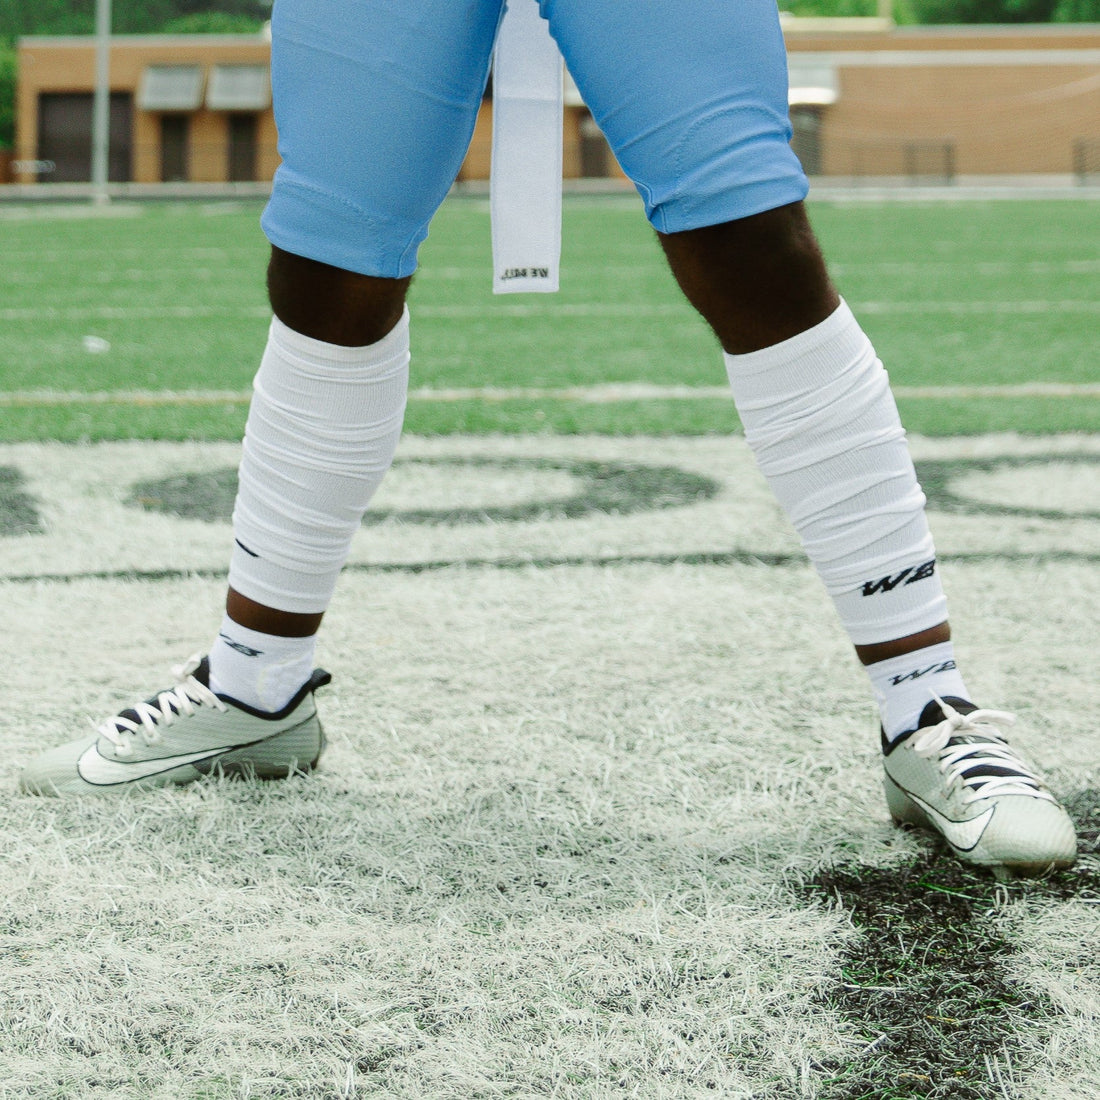 How do football leg sleeves help with player protection? – We Ball